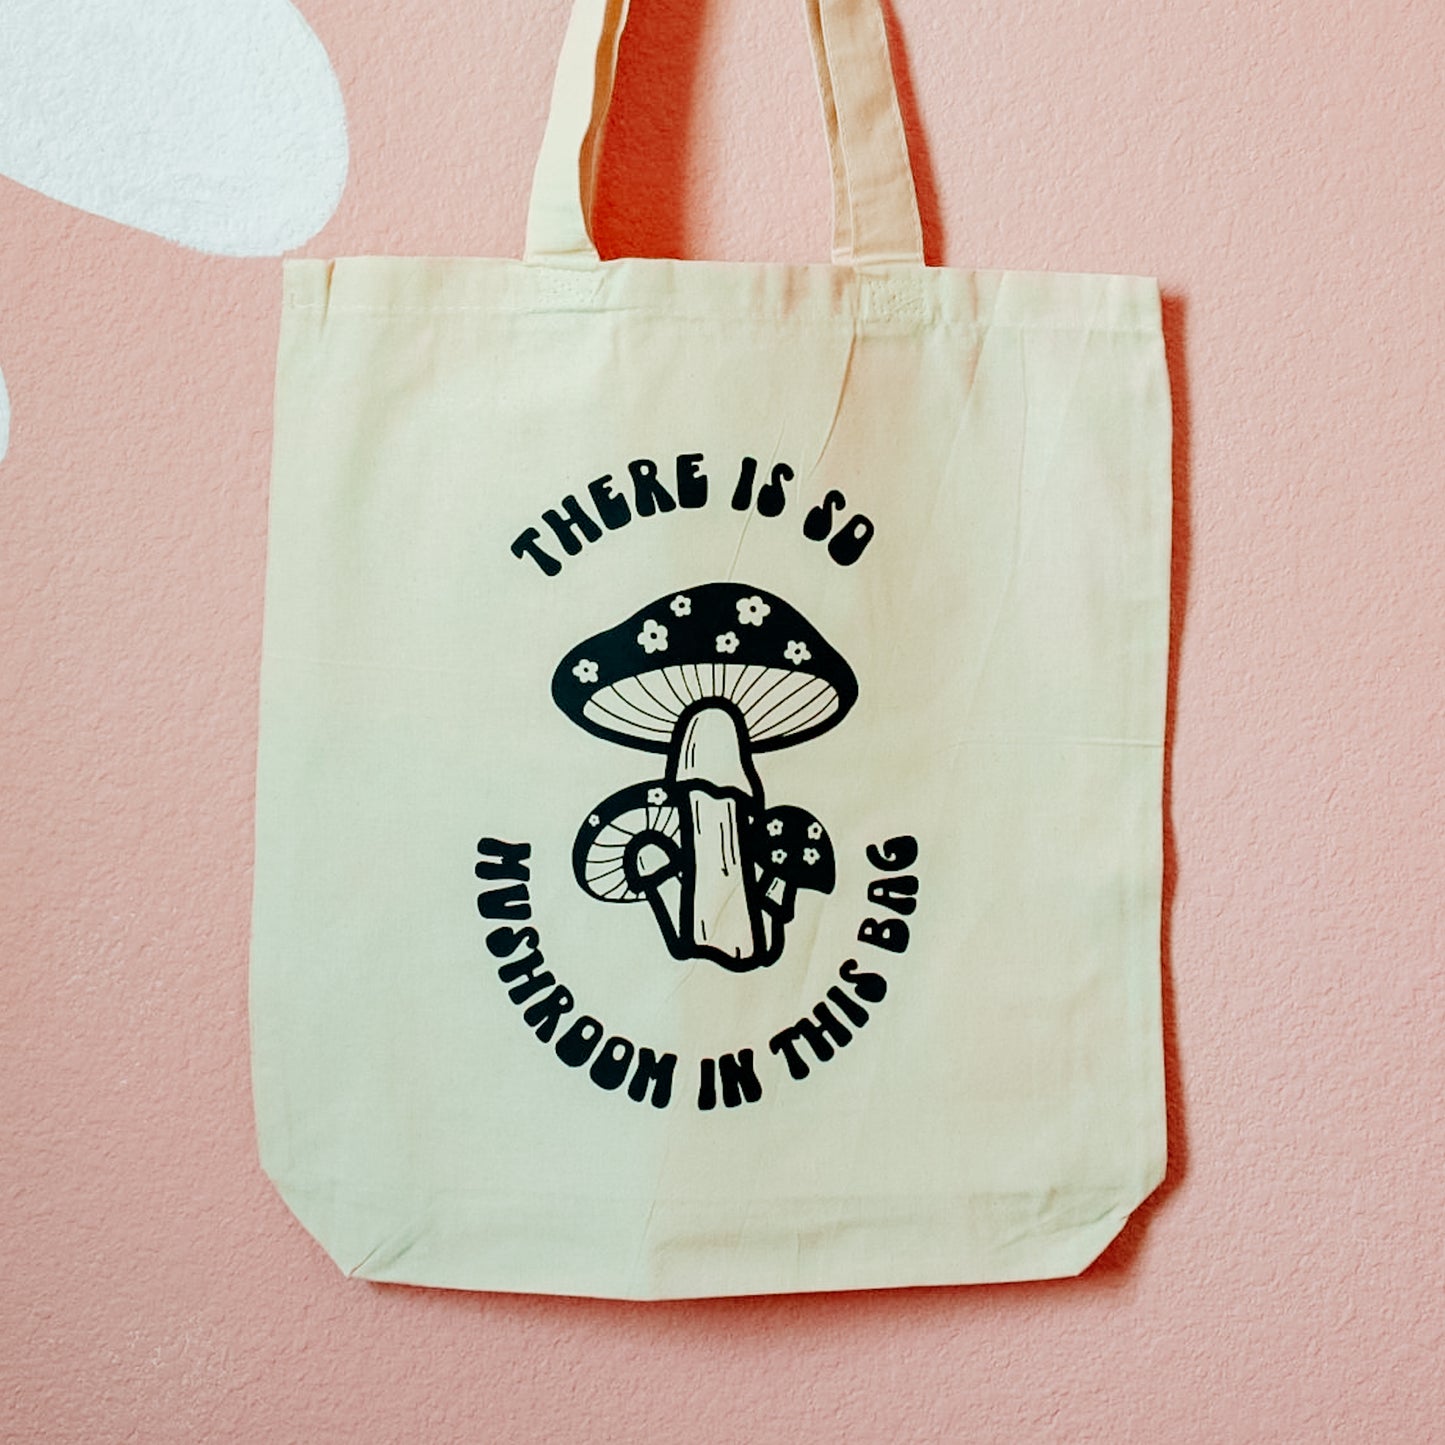 There Is So Mushroom In This Bag Tote